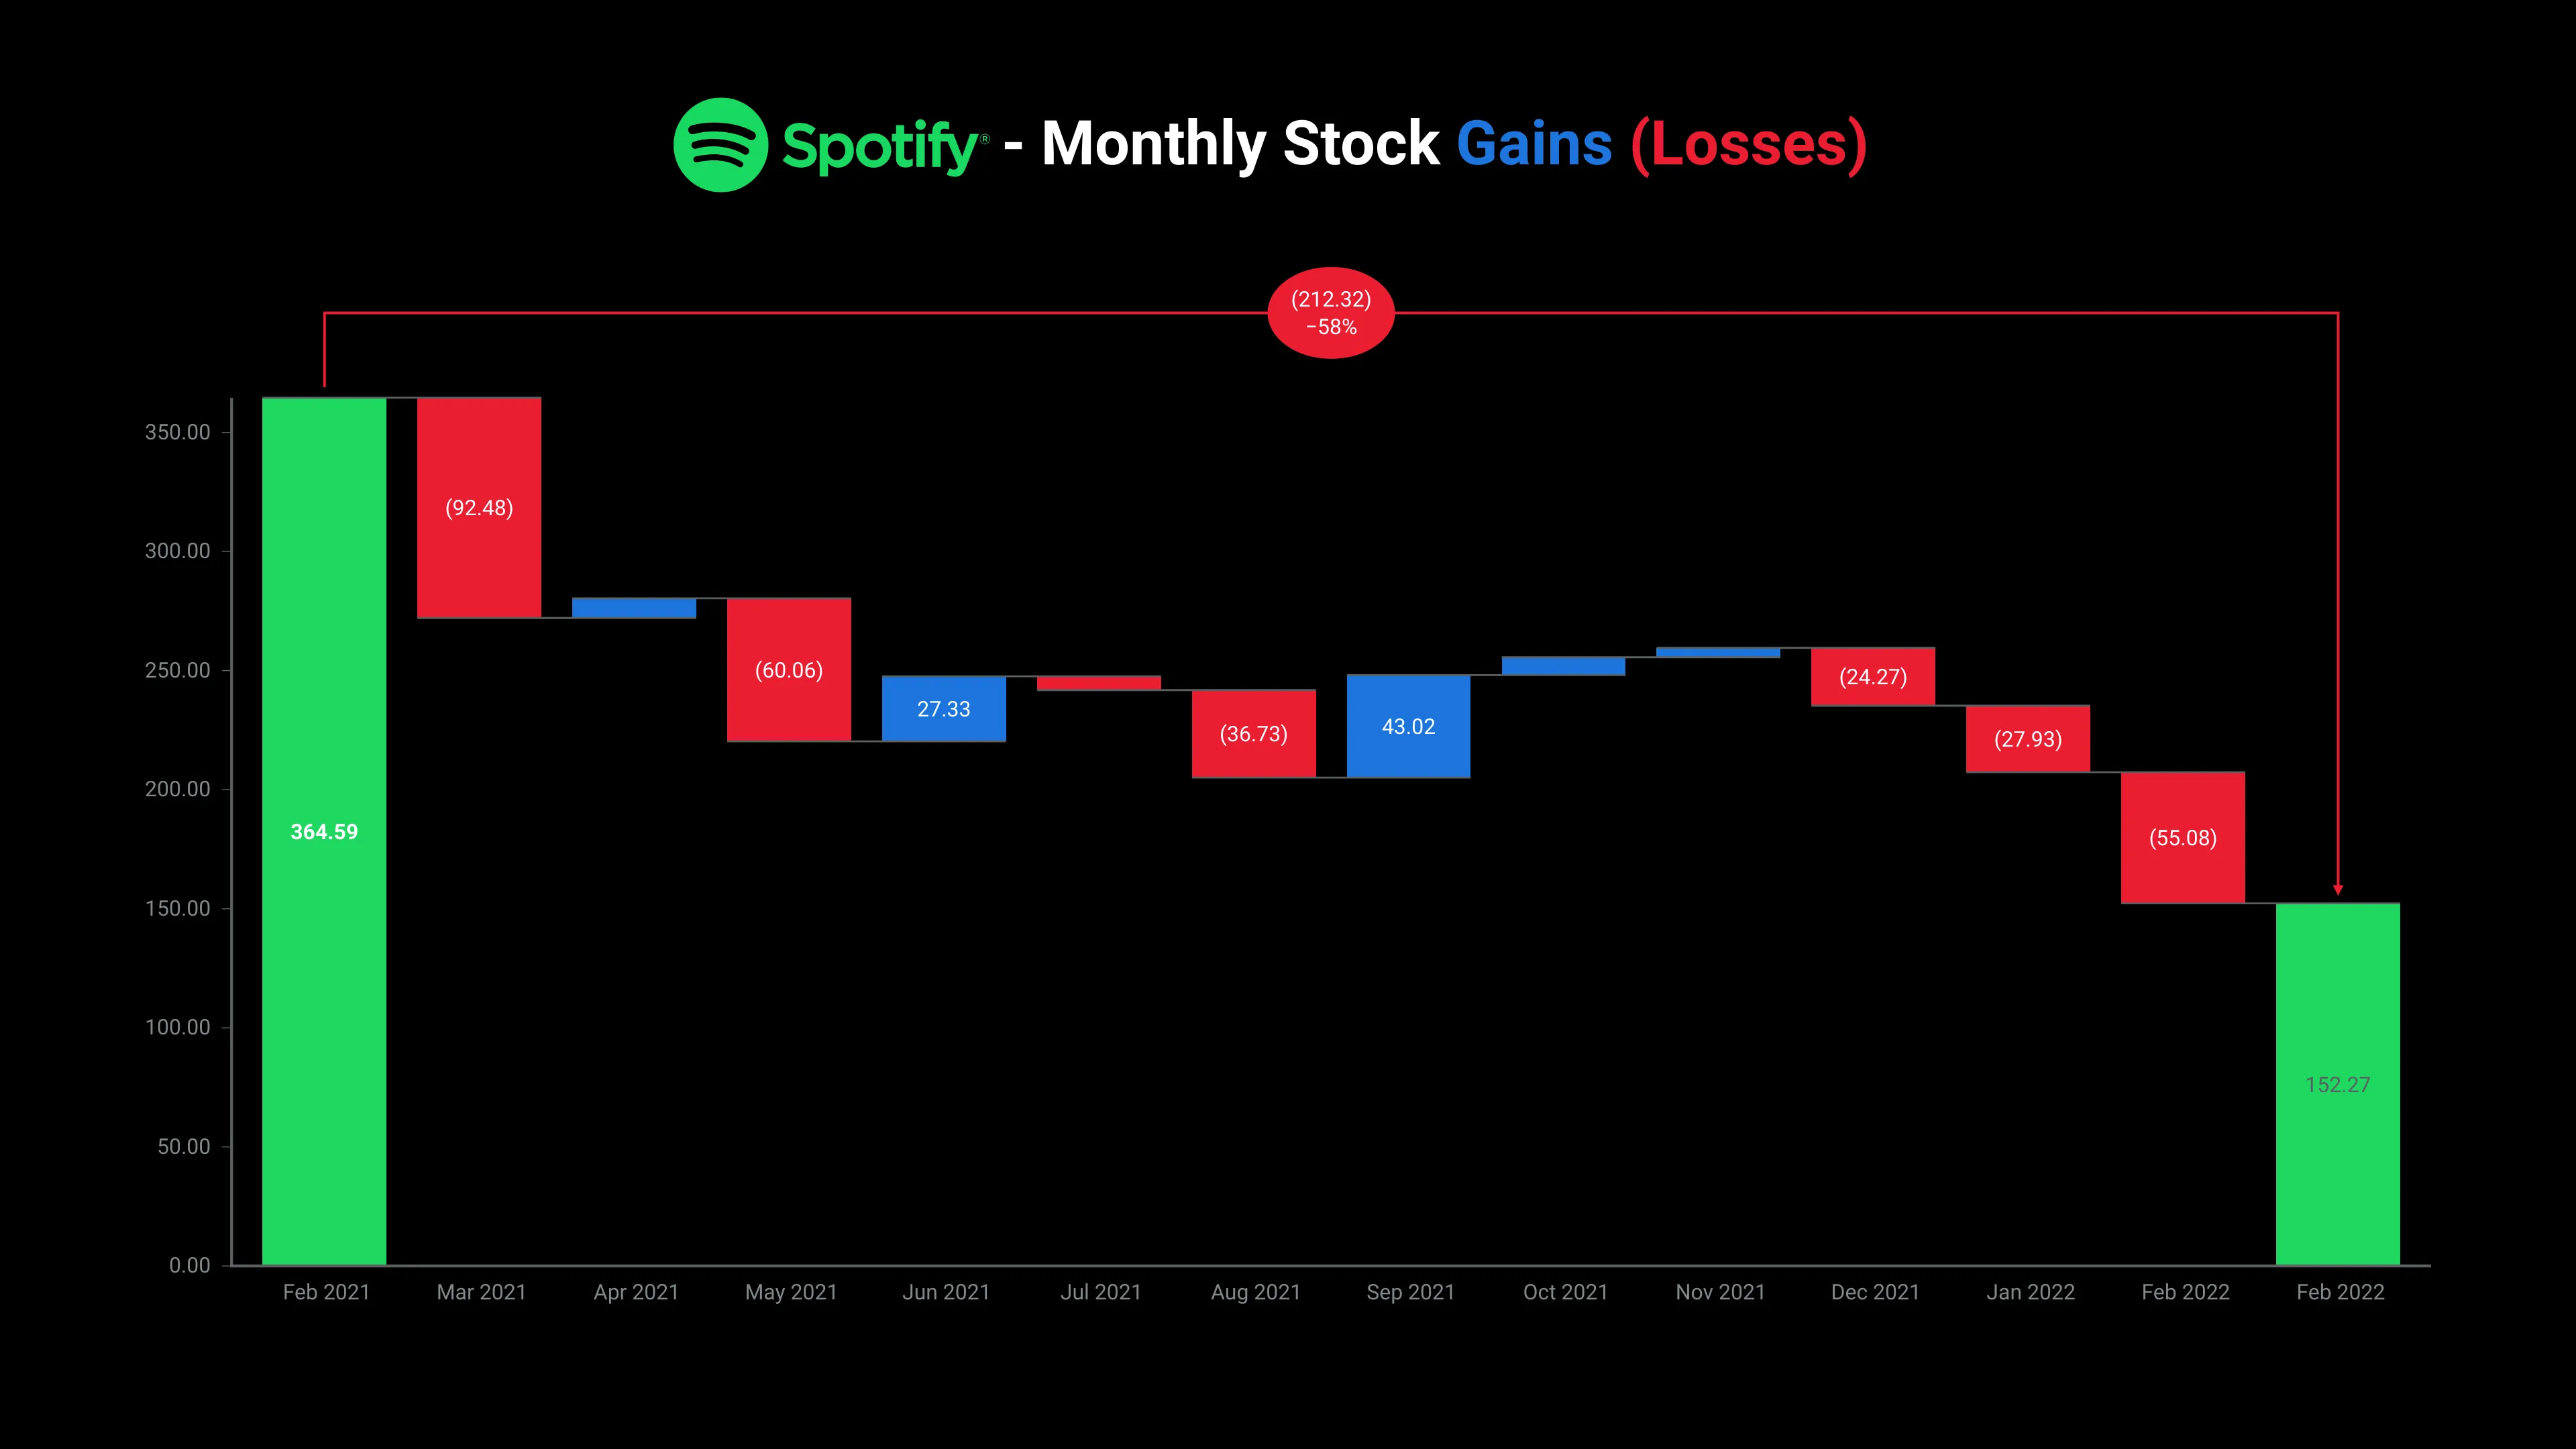 Spotify - Monthly Stock Gains (Losses)